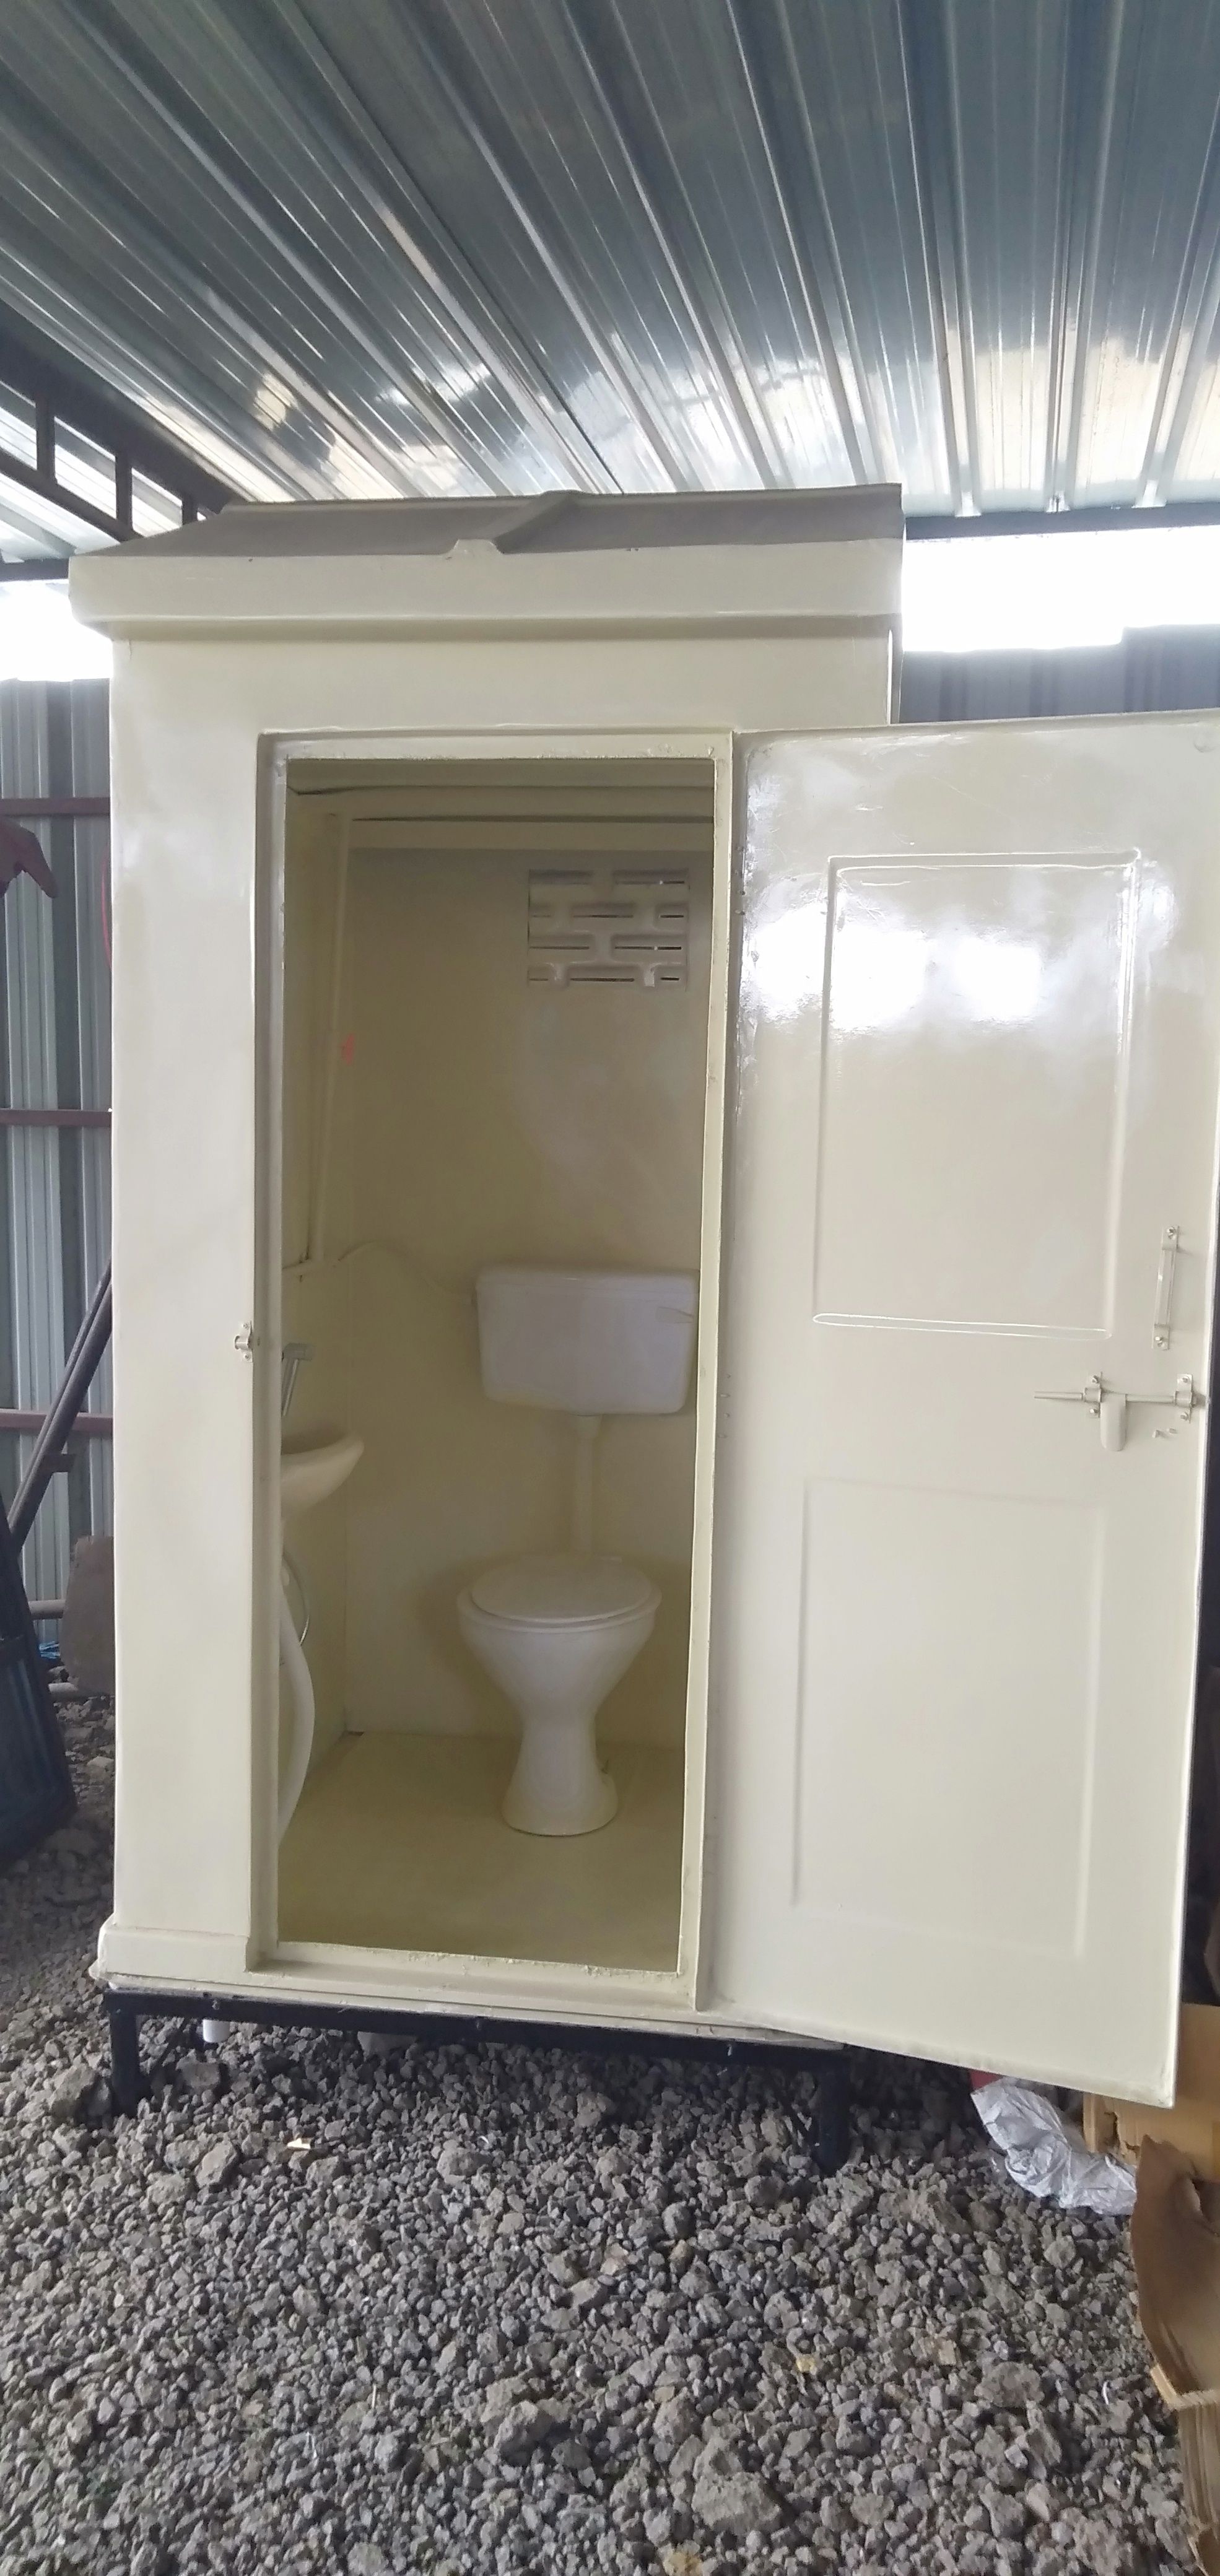 T11 EXECUTIVE TOILET WITH WATER TANK 4 ft x 3  5 ft